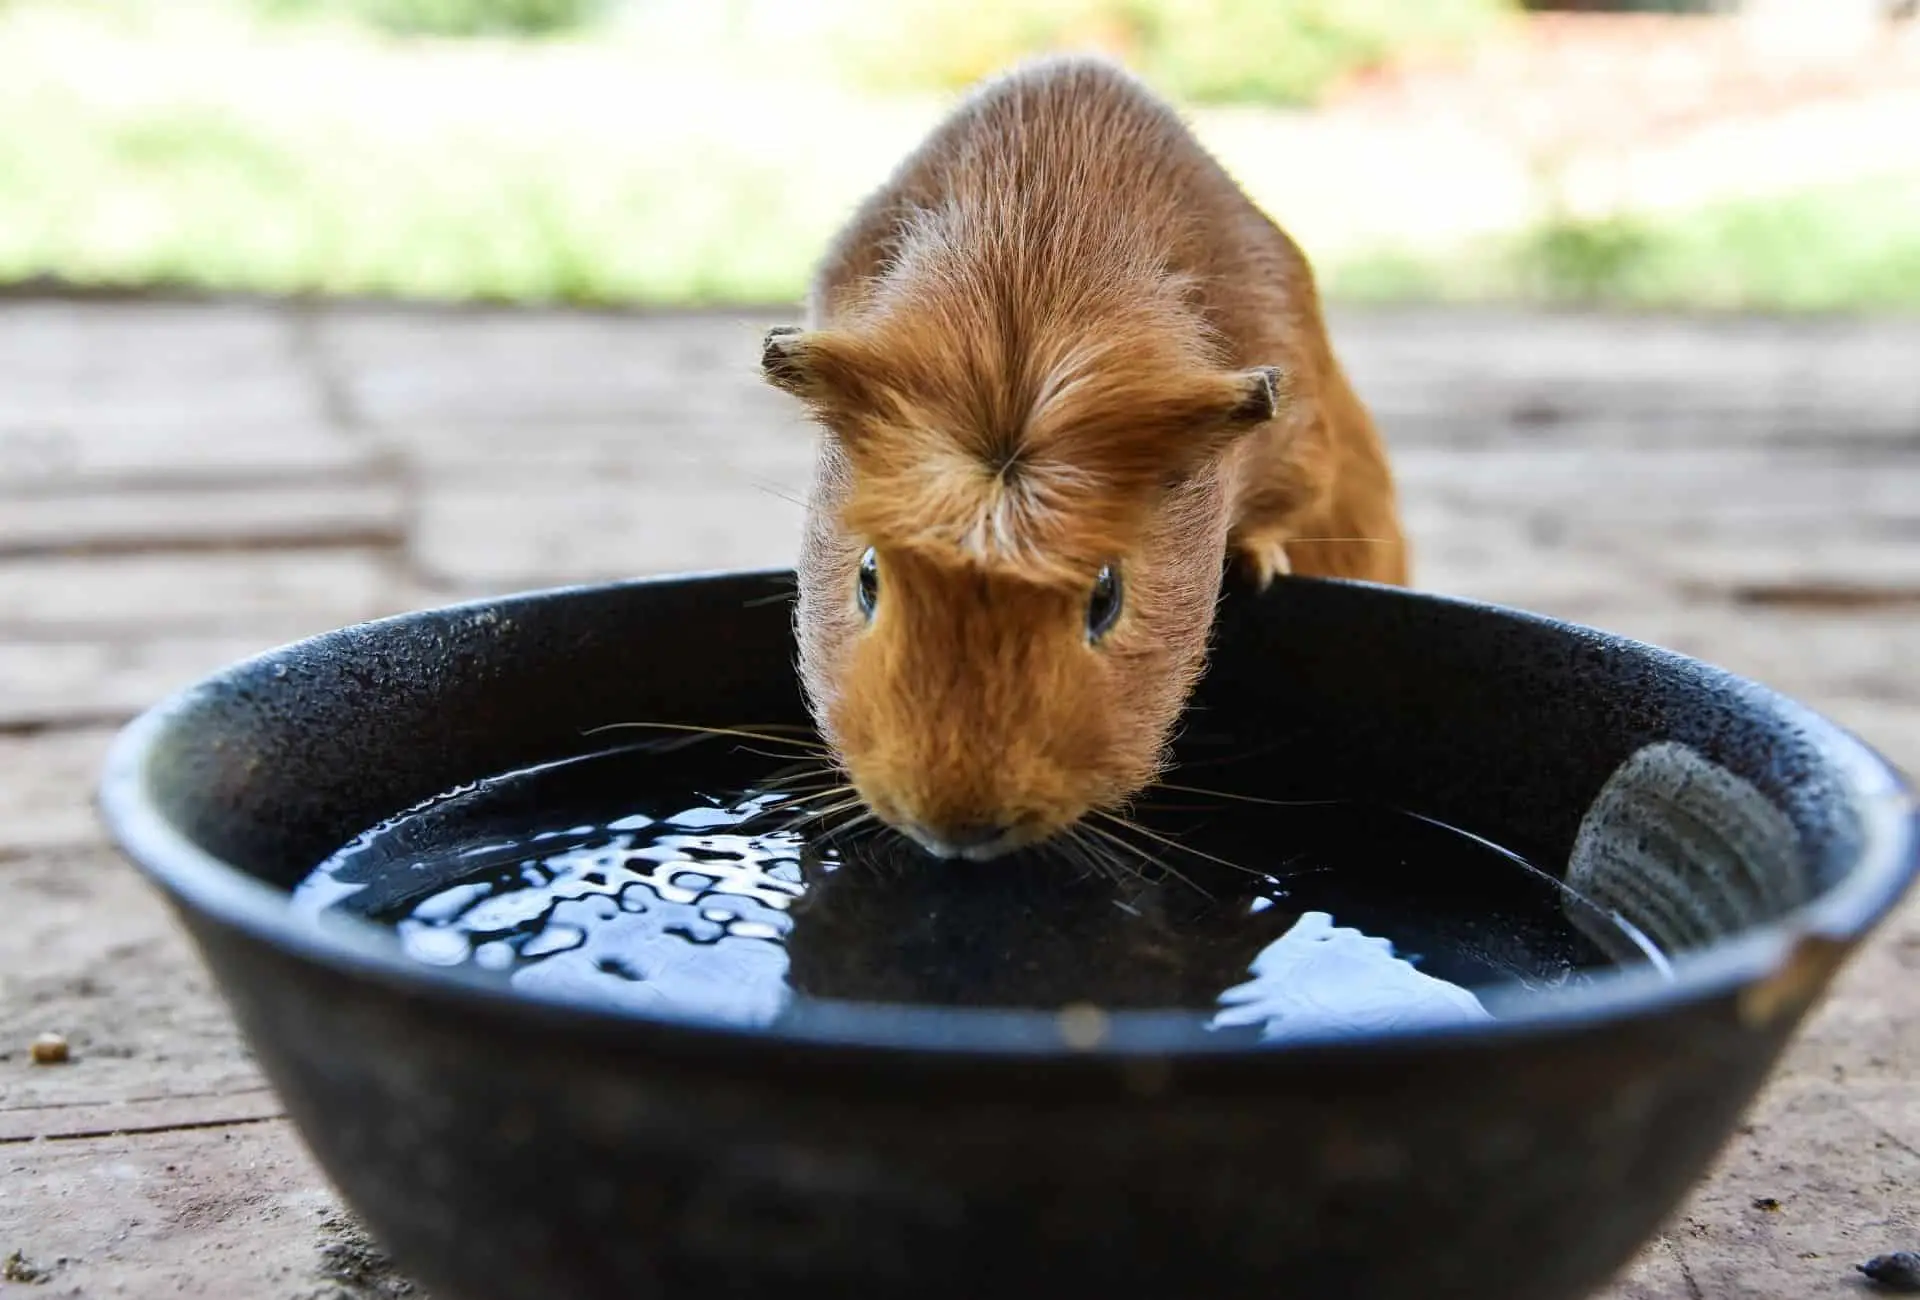 Guinea pig drinking water from a bowl.